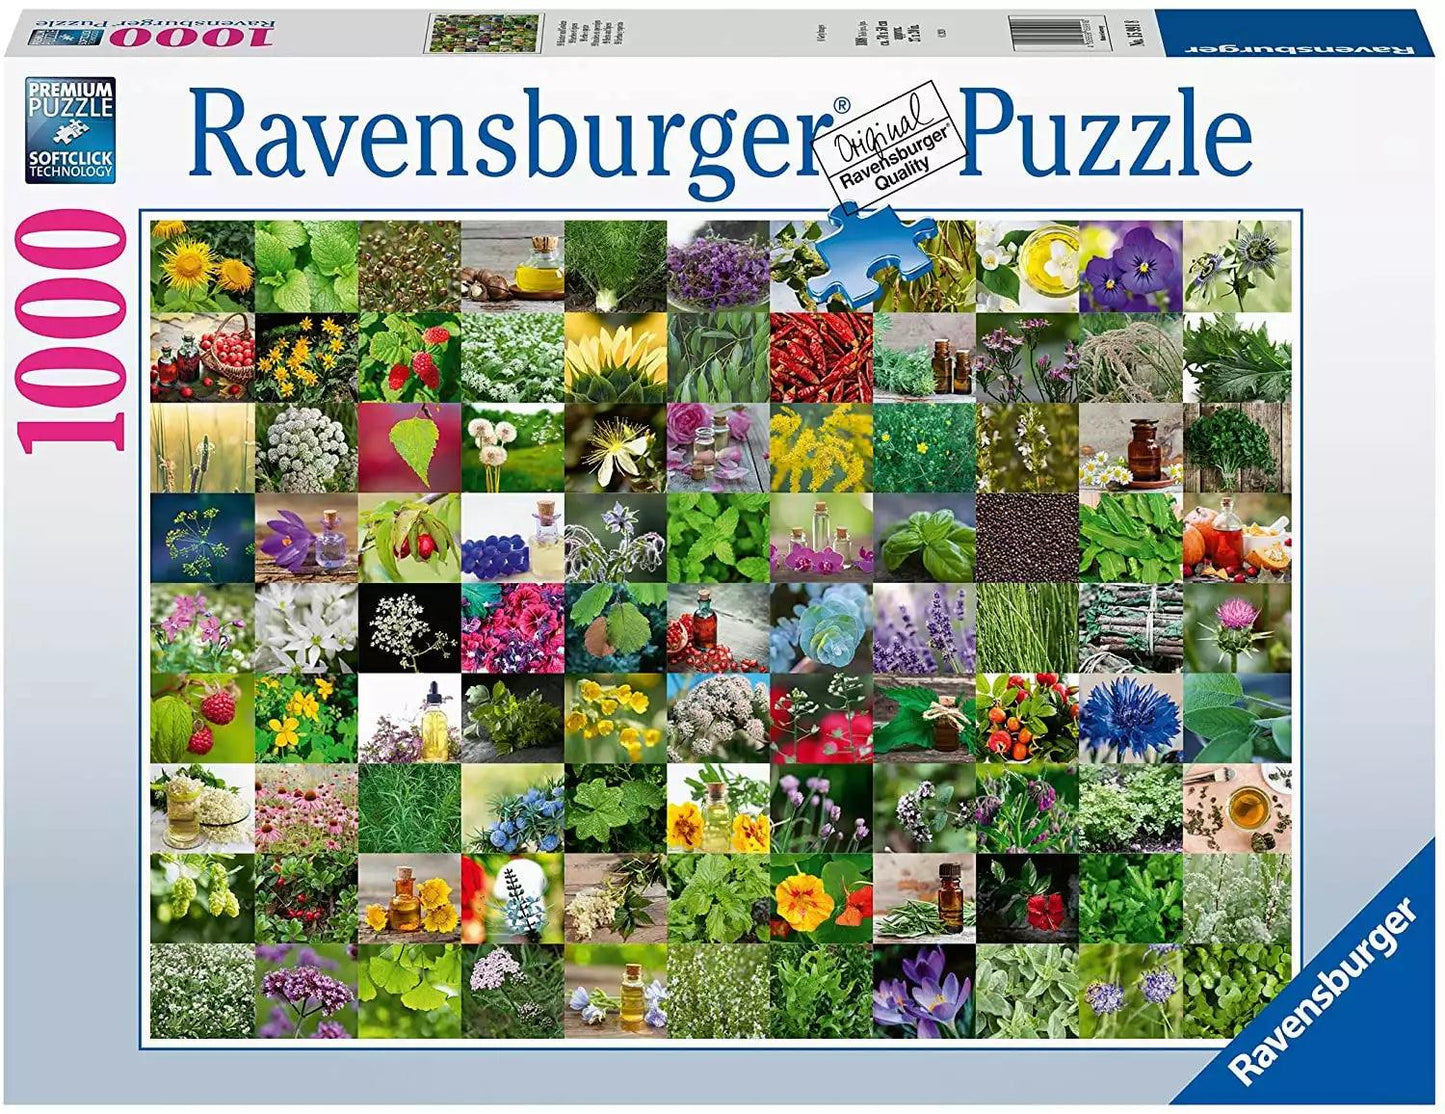 Ravensburger 99 Herbs and Spices Jigsaw Puzzle 1000 Pieces - Eclipse Games Puzzles Novelties